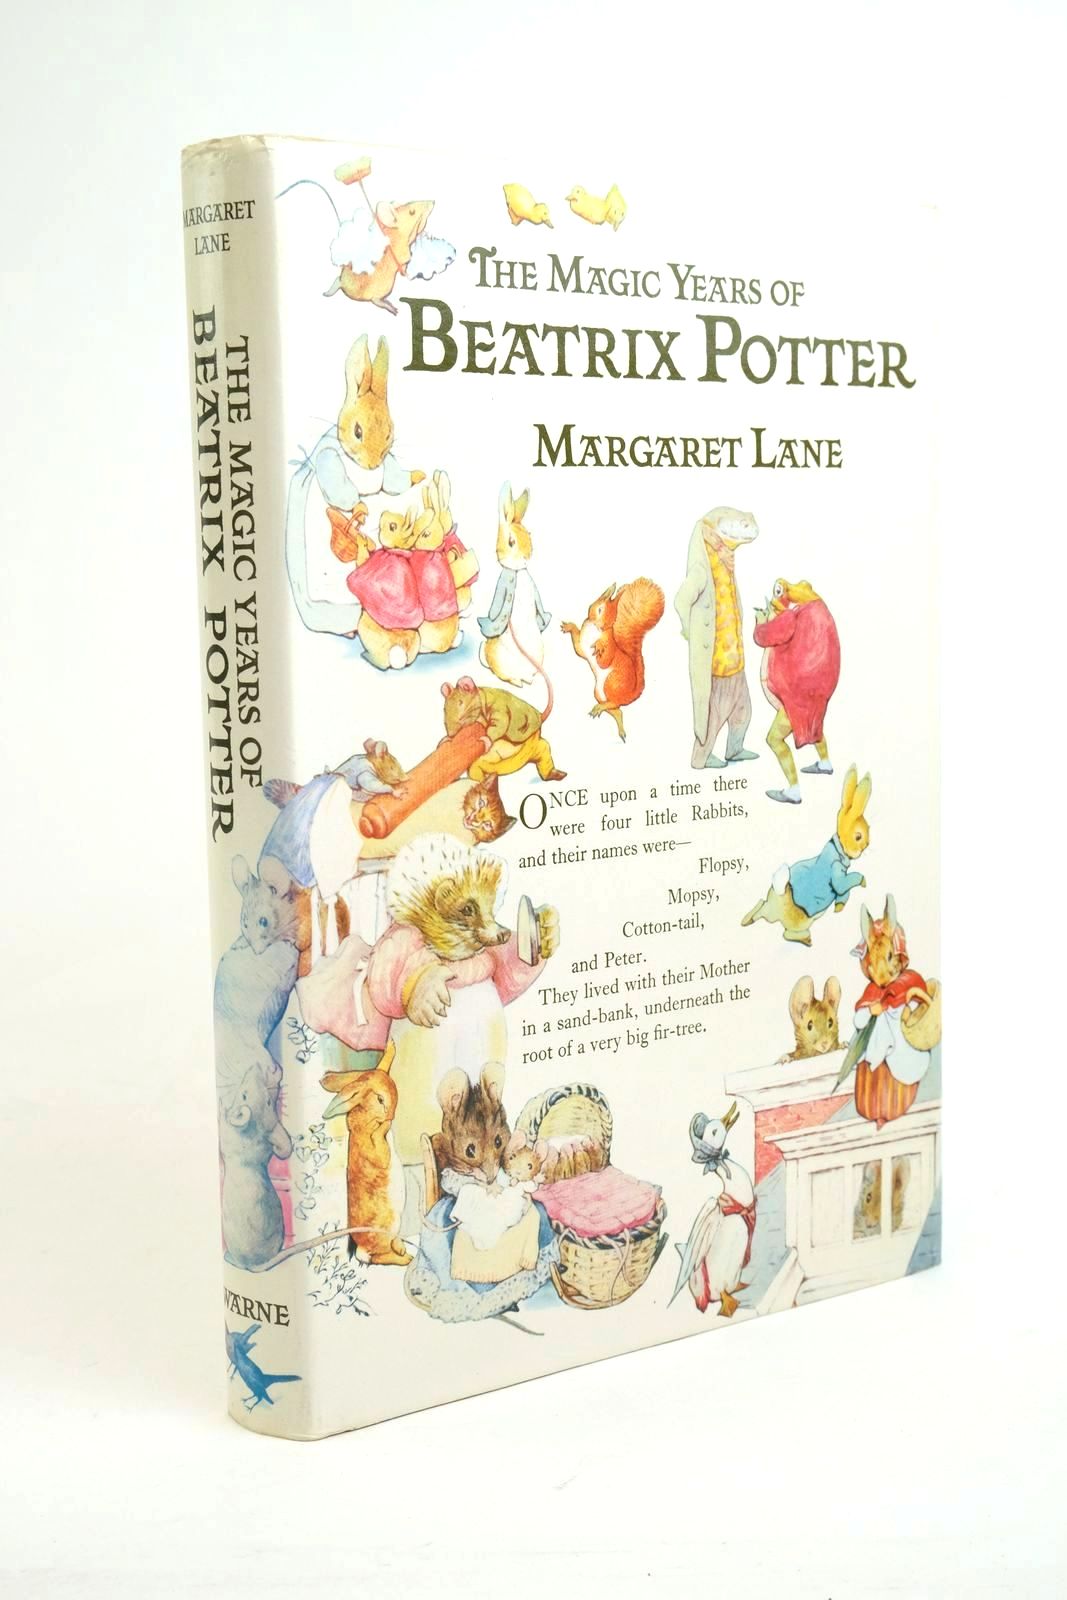 Photo of THE MAGIC YEARS OF BEATRIX POTTER written by Lane, Margaret illustrated by Potter, Beatrix published by Frederick Warne (Publishers) Ltd. (STOCK CODE: 1322117)  for sale by Stella & Rose's Books